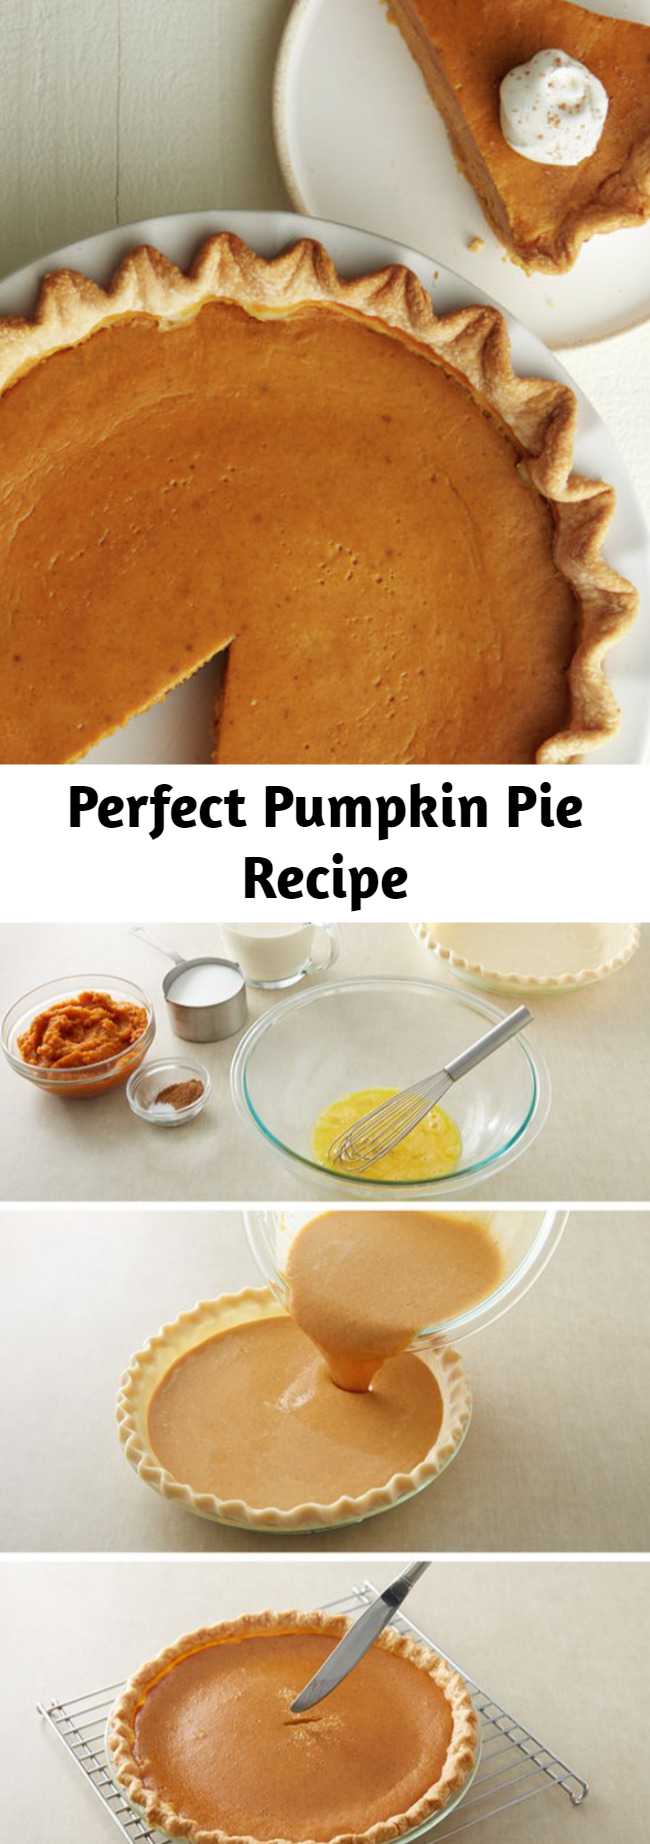 Perfect Pumpkin Pie Recipe - Pie? Easy? Yes and yes! Our refrigerated pie crust makes pie-making easier than ever. This recipe takes the worry out of pie-making and has step-by-step instructions. The end result will wow all your guests this holiday season! Save this pumpkin pie recipe to make for fall, Thanksgiving or Christmas this year!